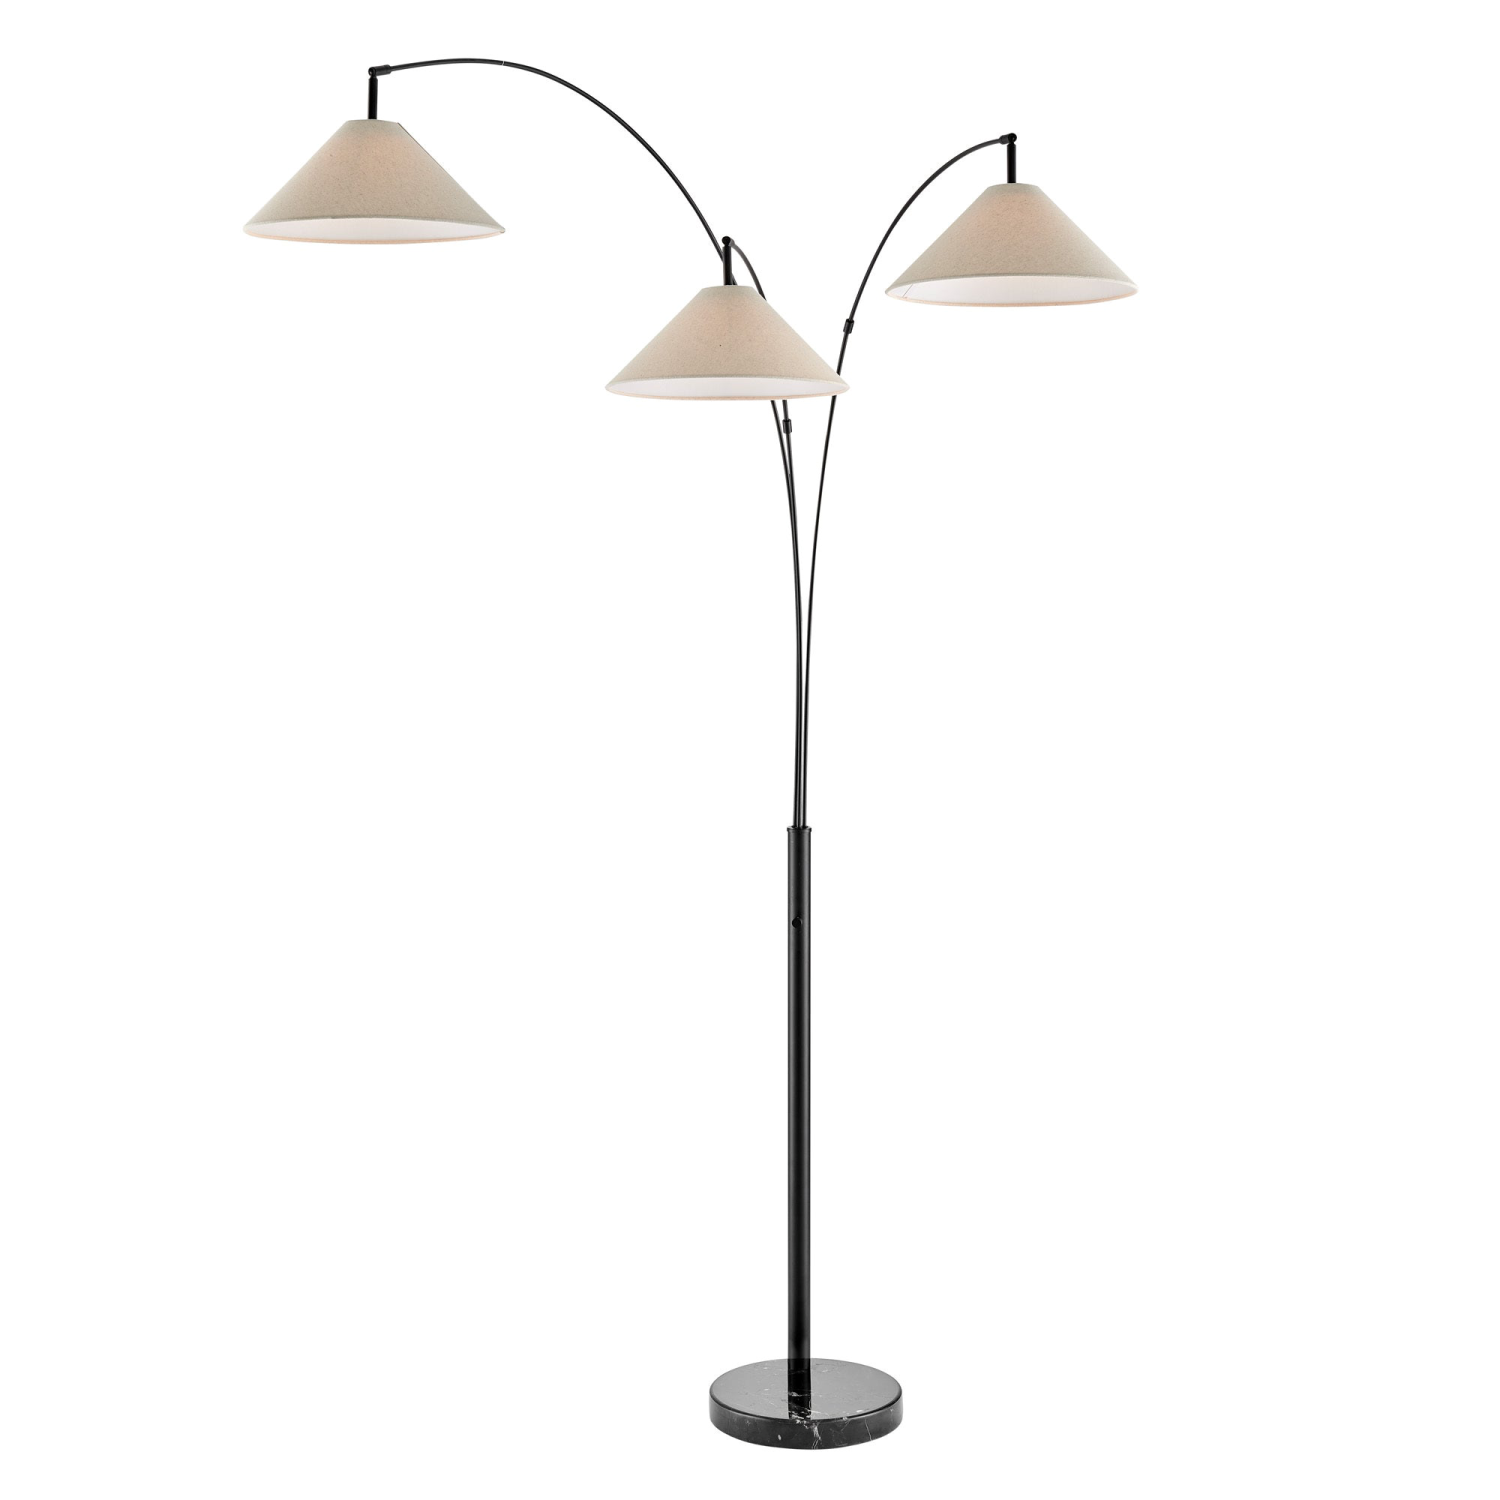 Hadas Floor Lamp Picture with White Background